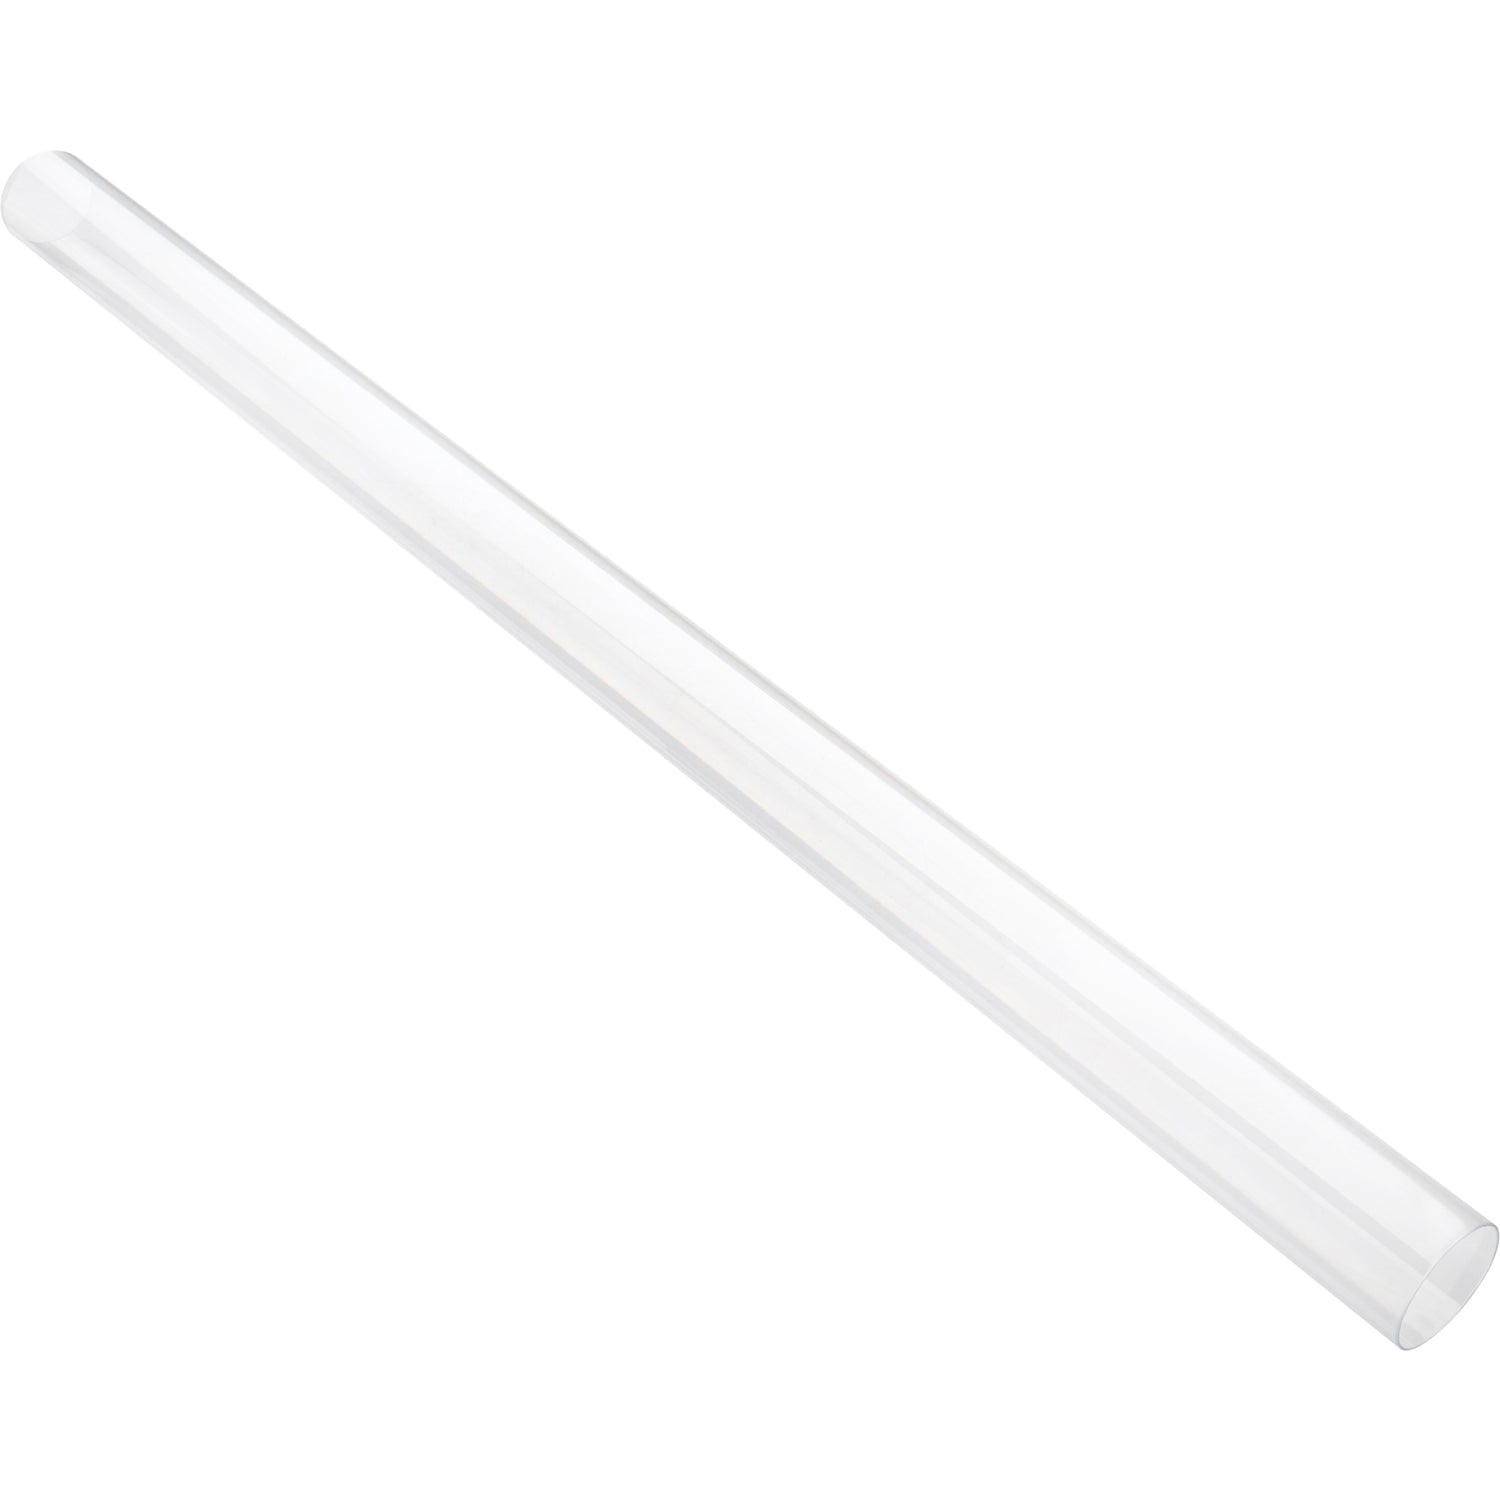 Clear polycarbonate round tube on white background